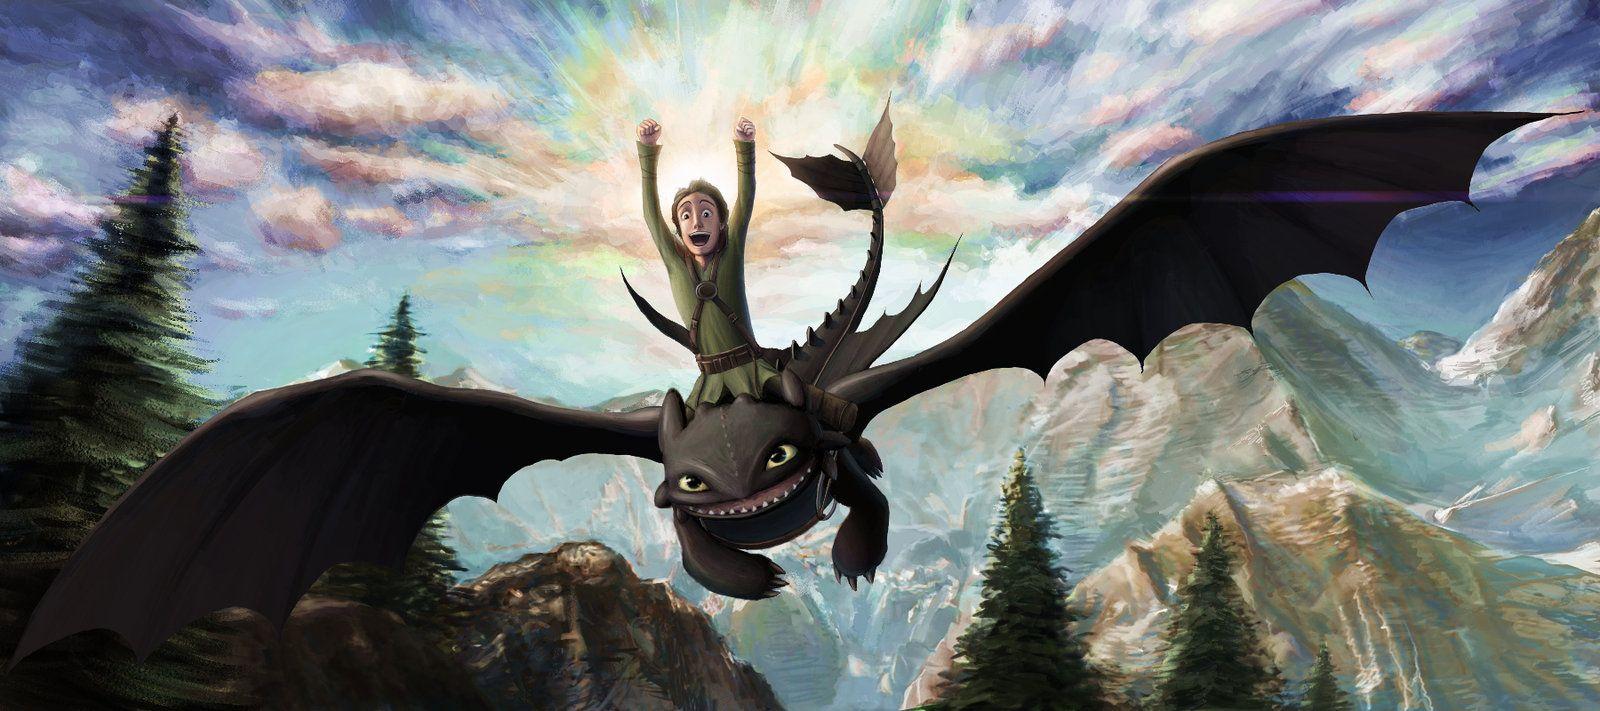 Amazing How To Train Your Dragon Fan Art Pieces